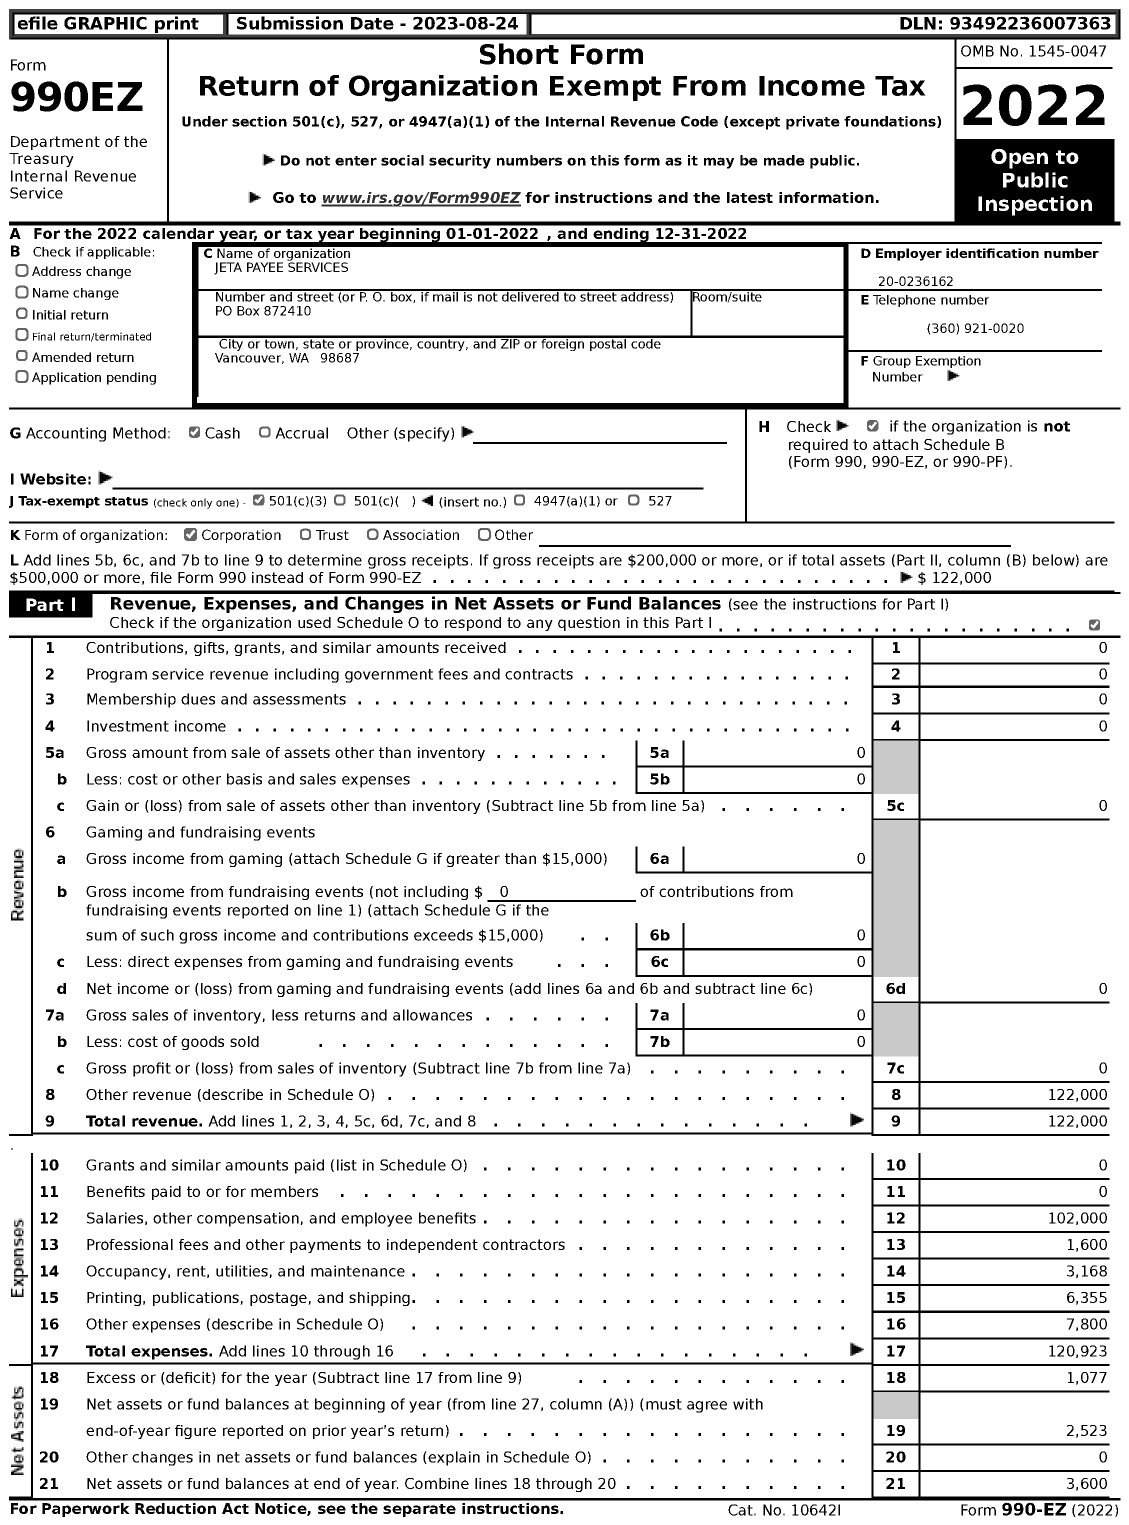 Image of first page of 2022 Form 990EZ for Jeta Payee Services